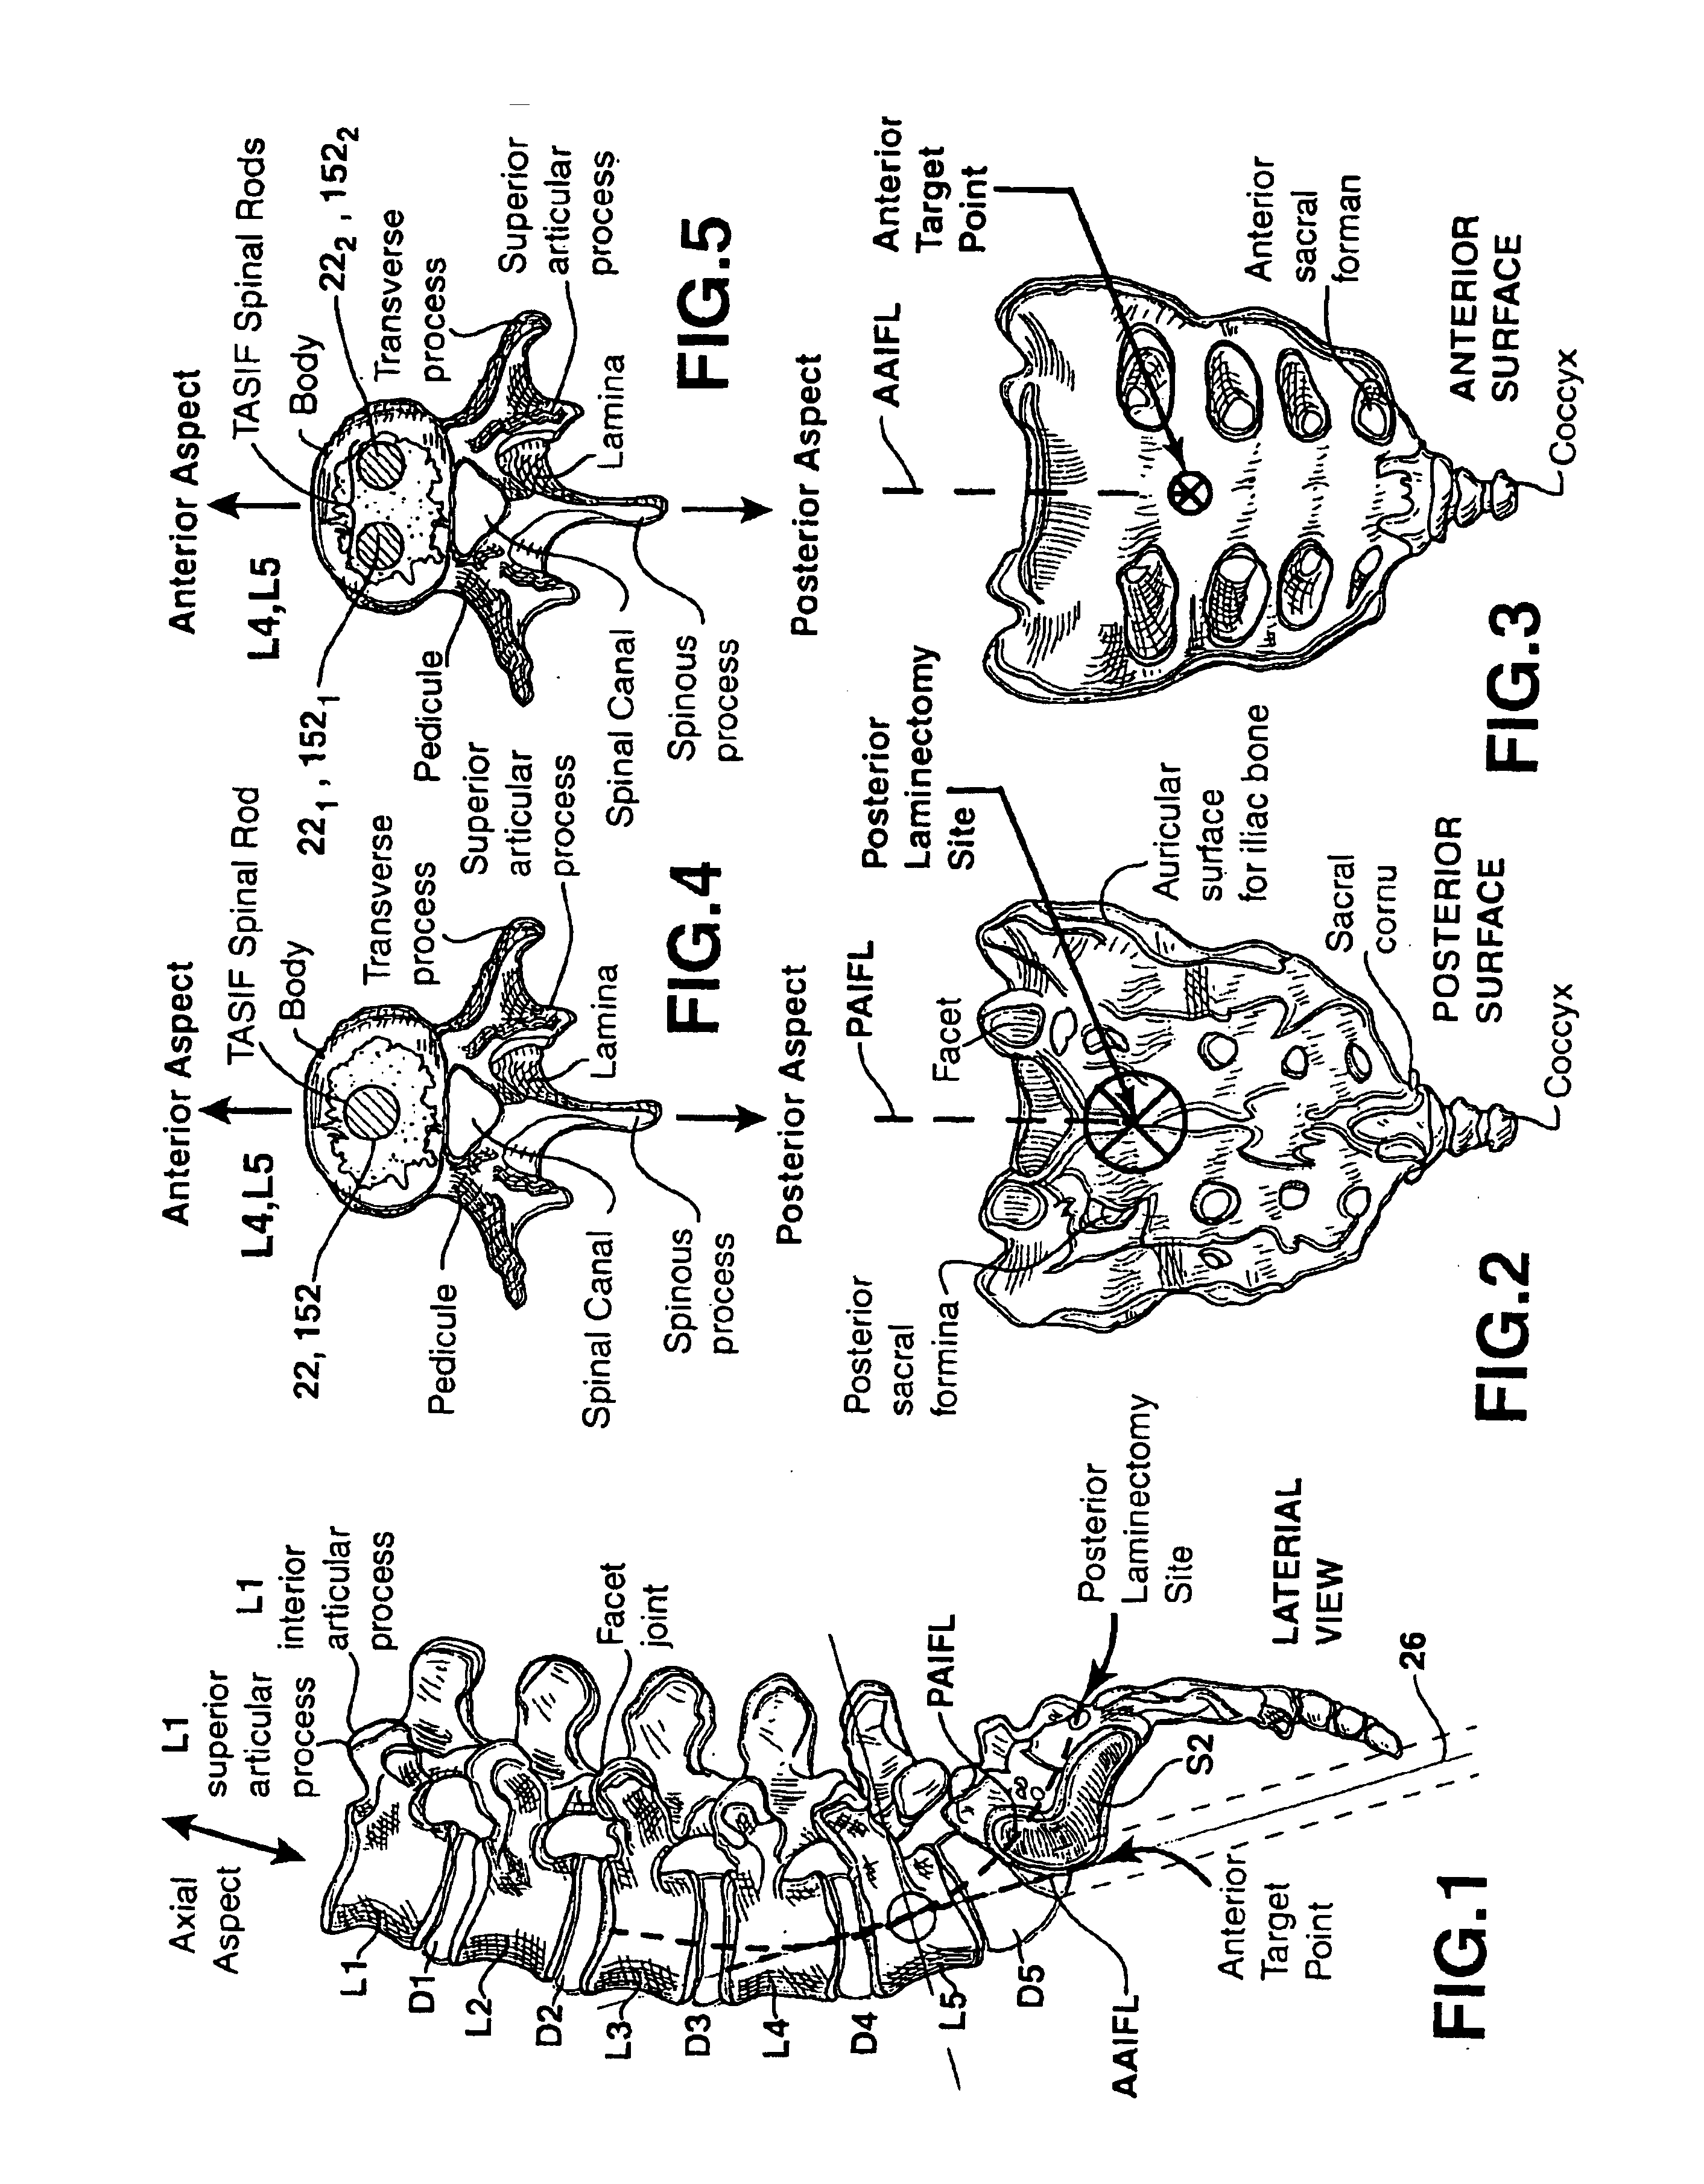 Methods and apparatus for forming curved axial bores through spinal vertebrae